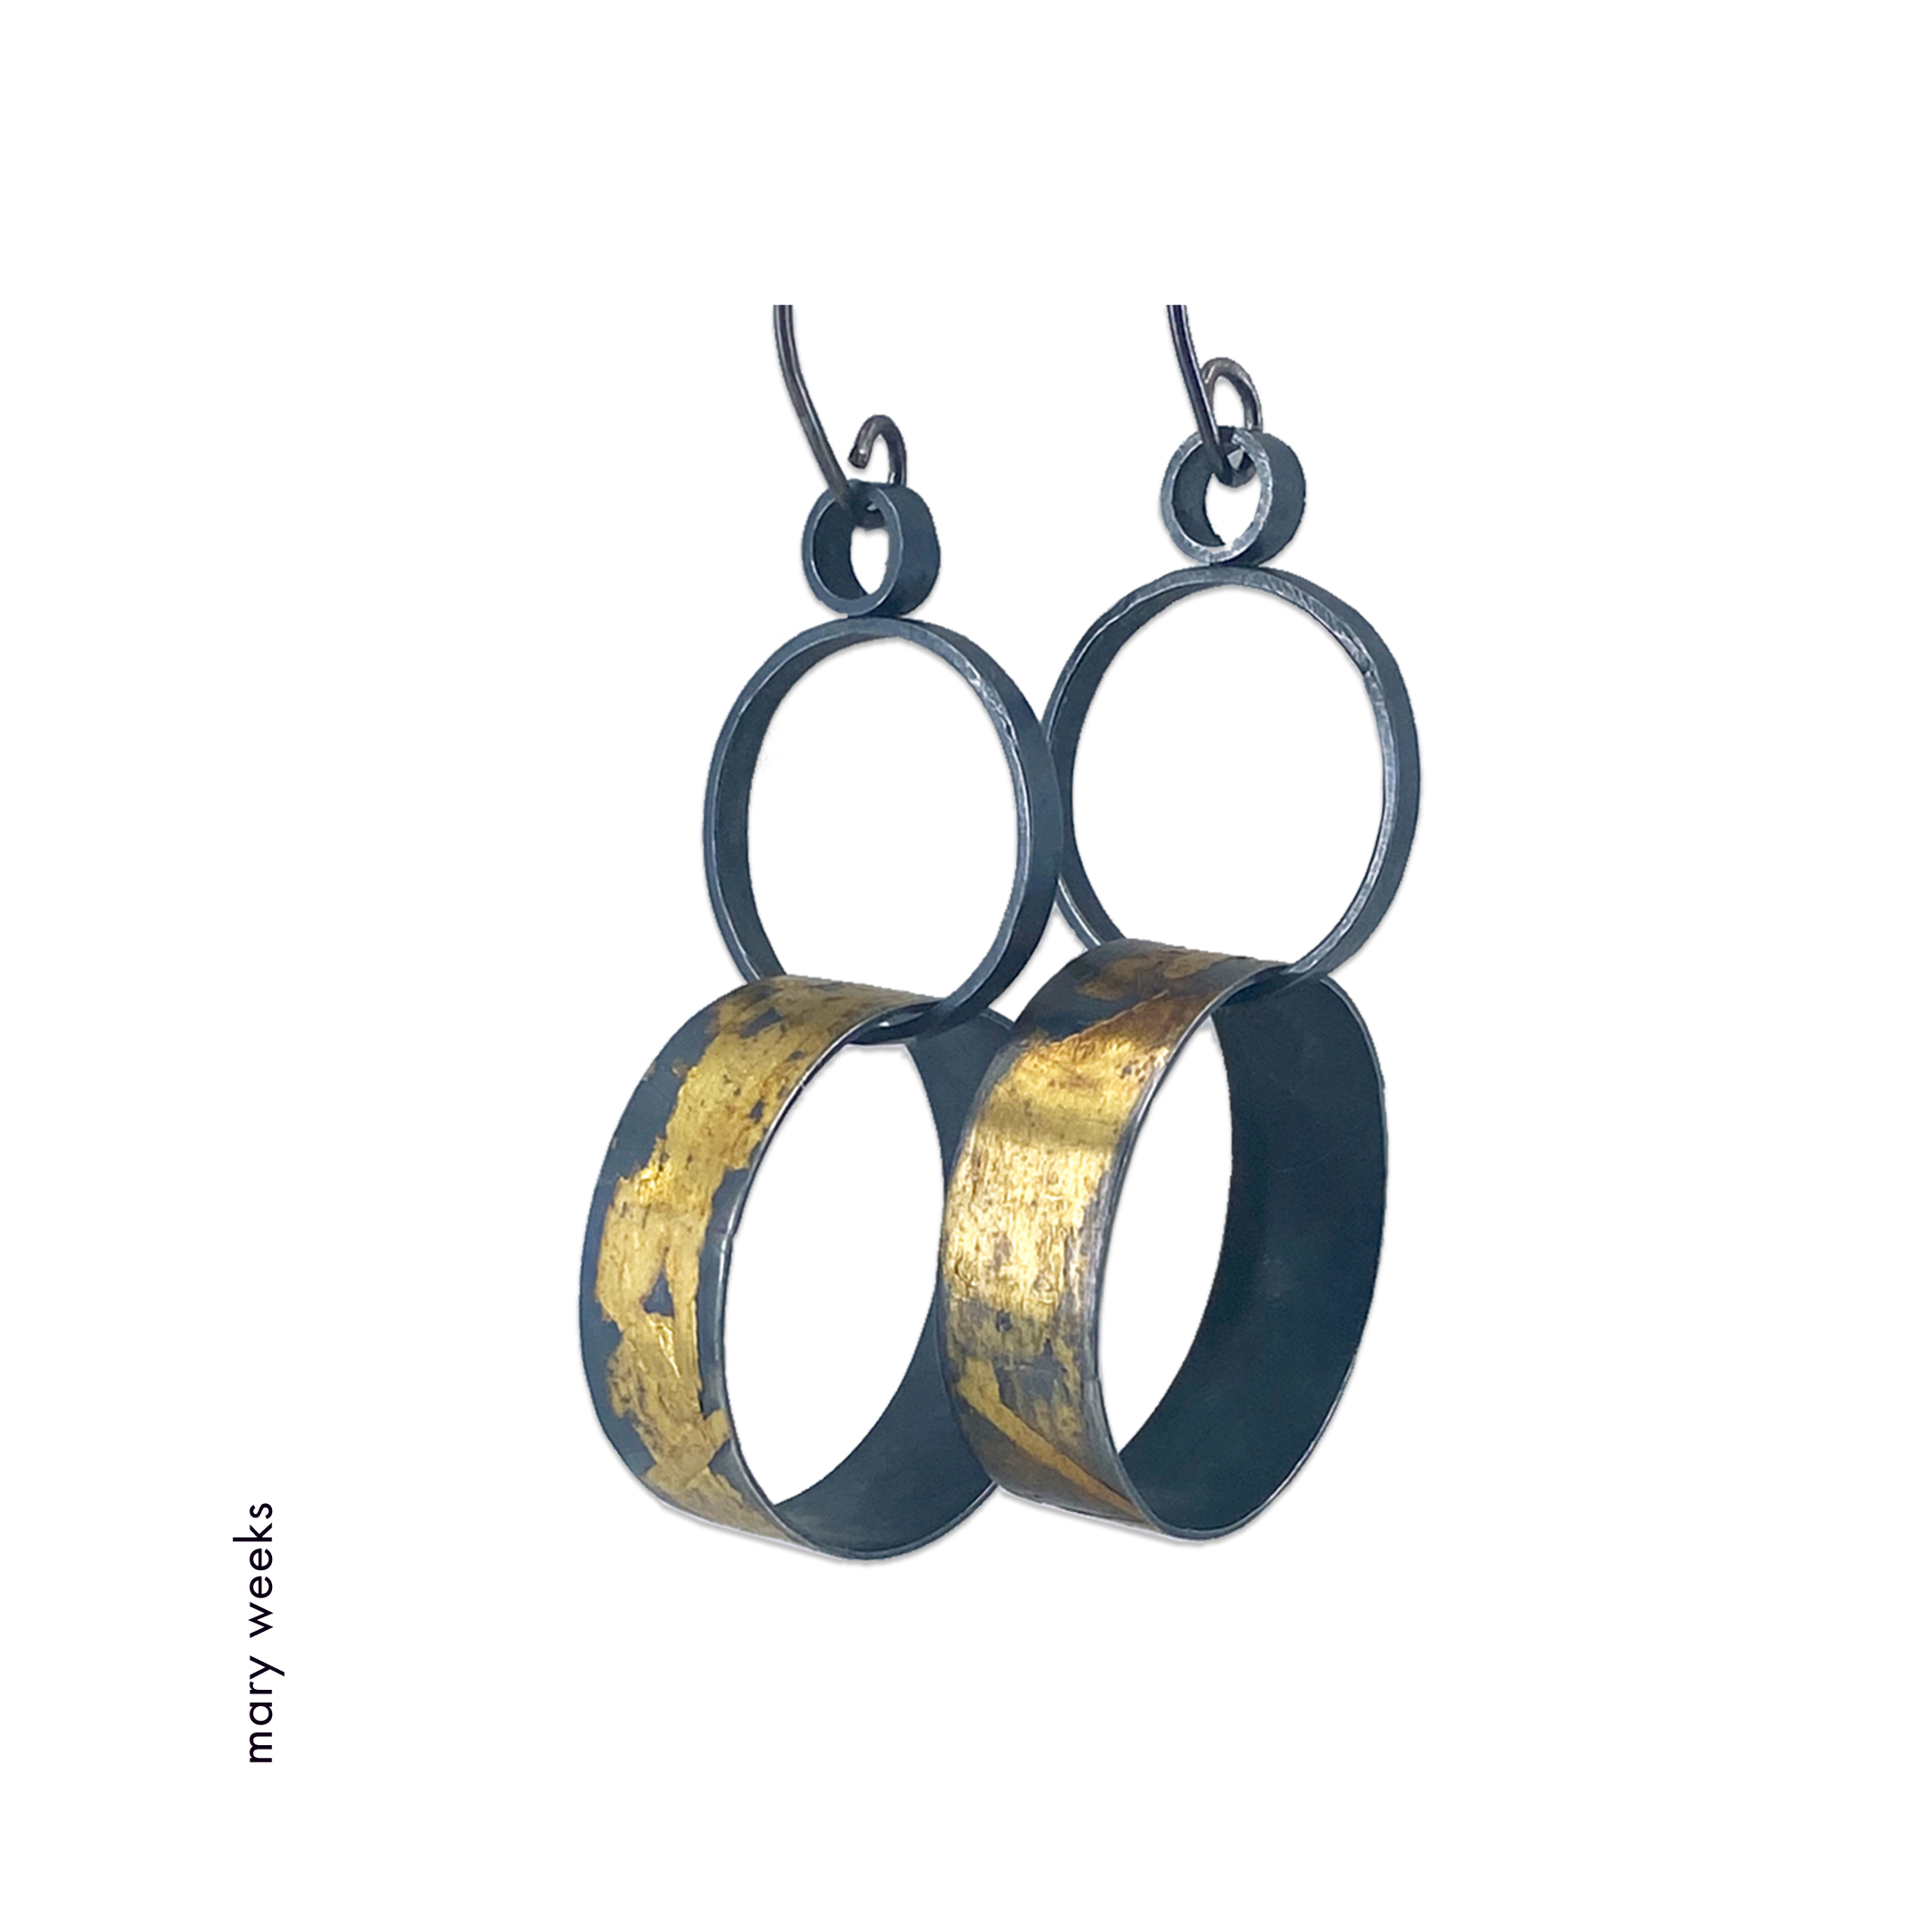 Mary Weeks made these oxidized sterling silver earrings made of two interlocking hoops; the bottom of each with Keum Boo applied gold.